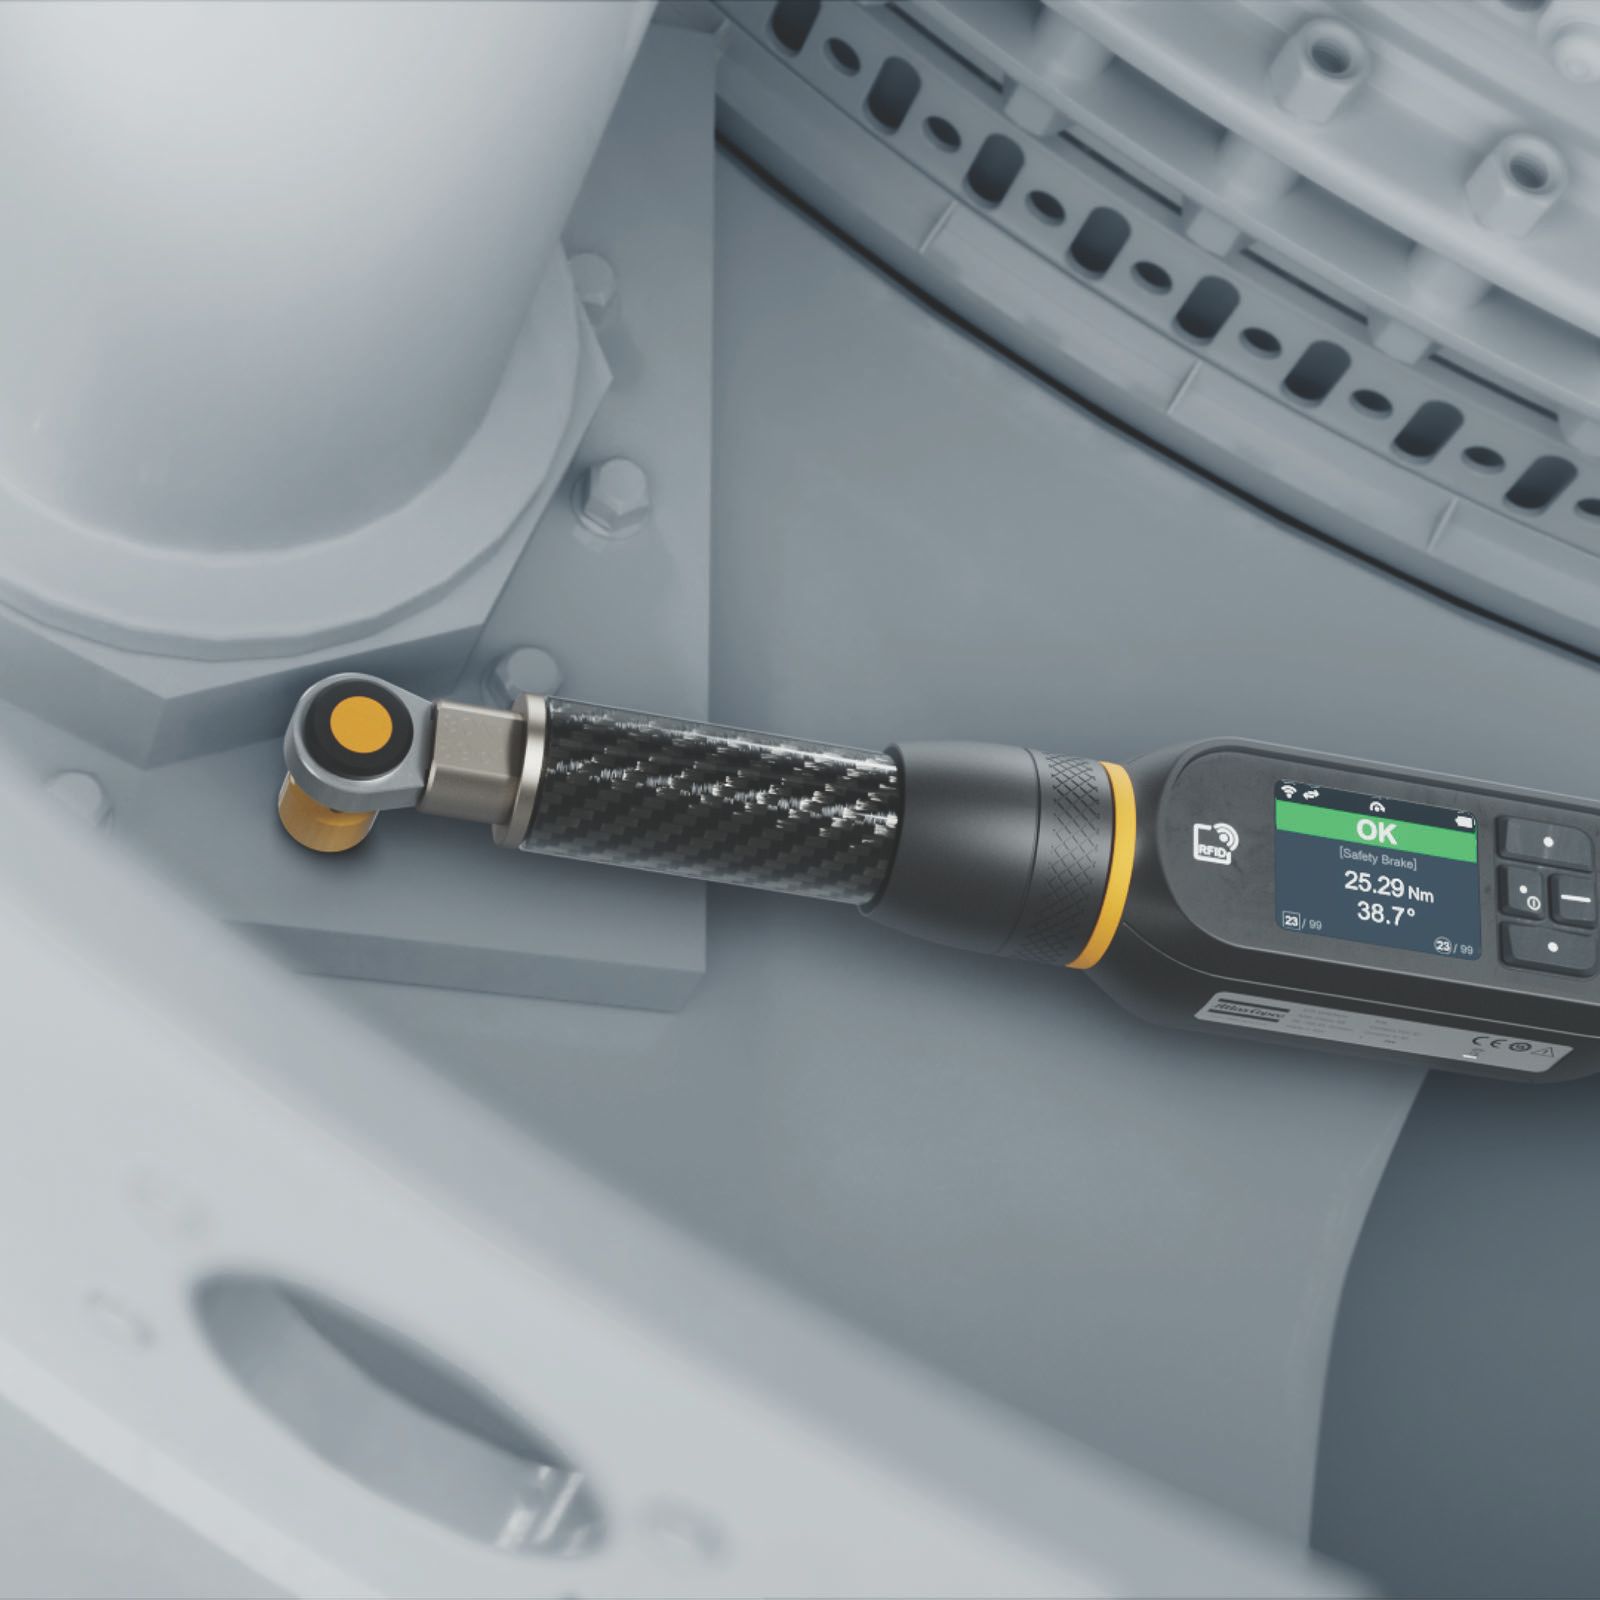 STRwrench - Smart Torque Wrench 제품 사진